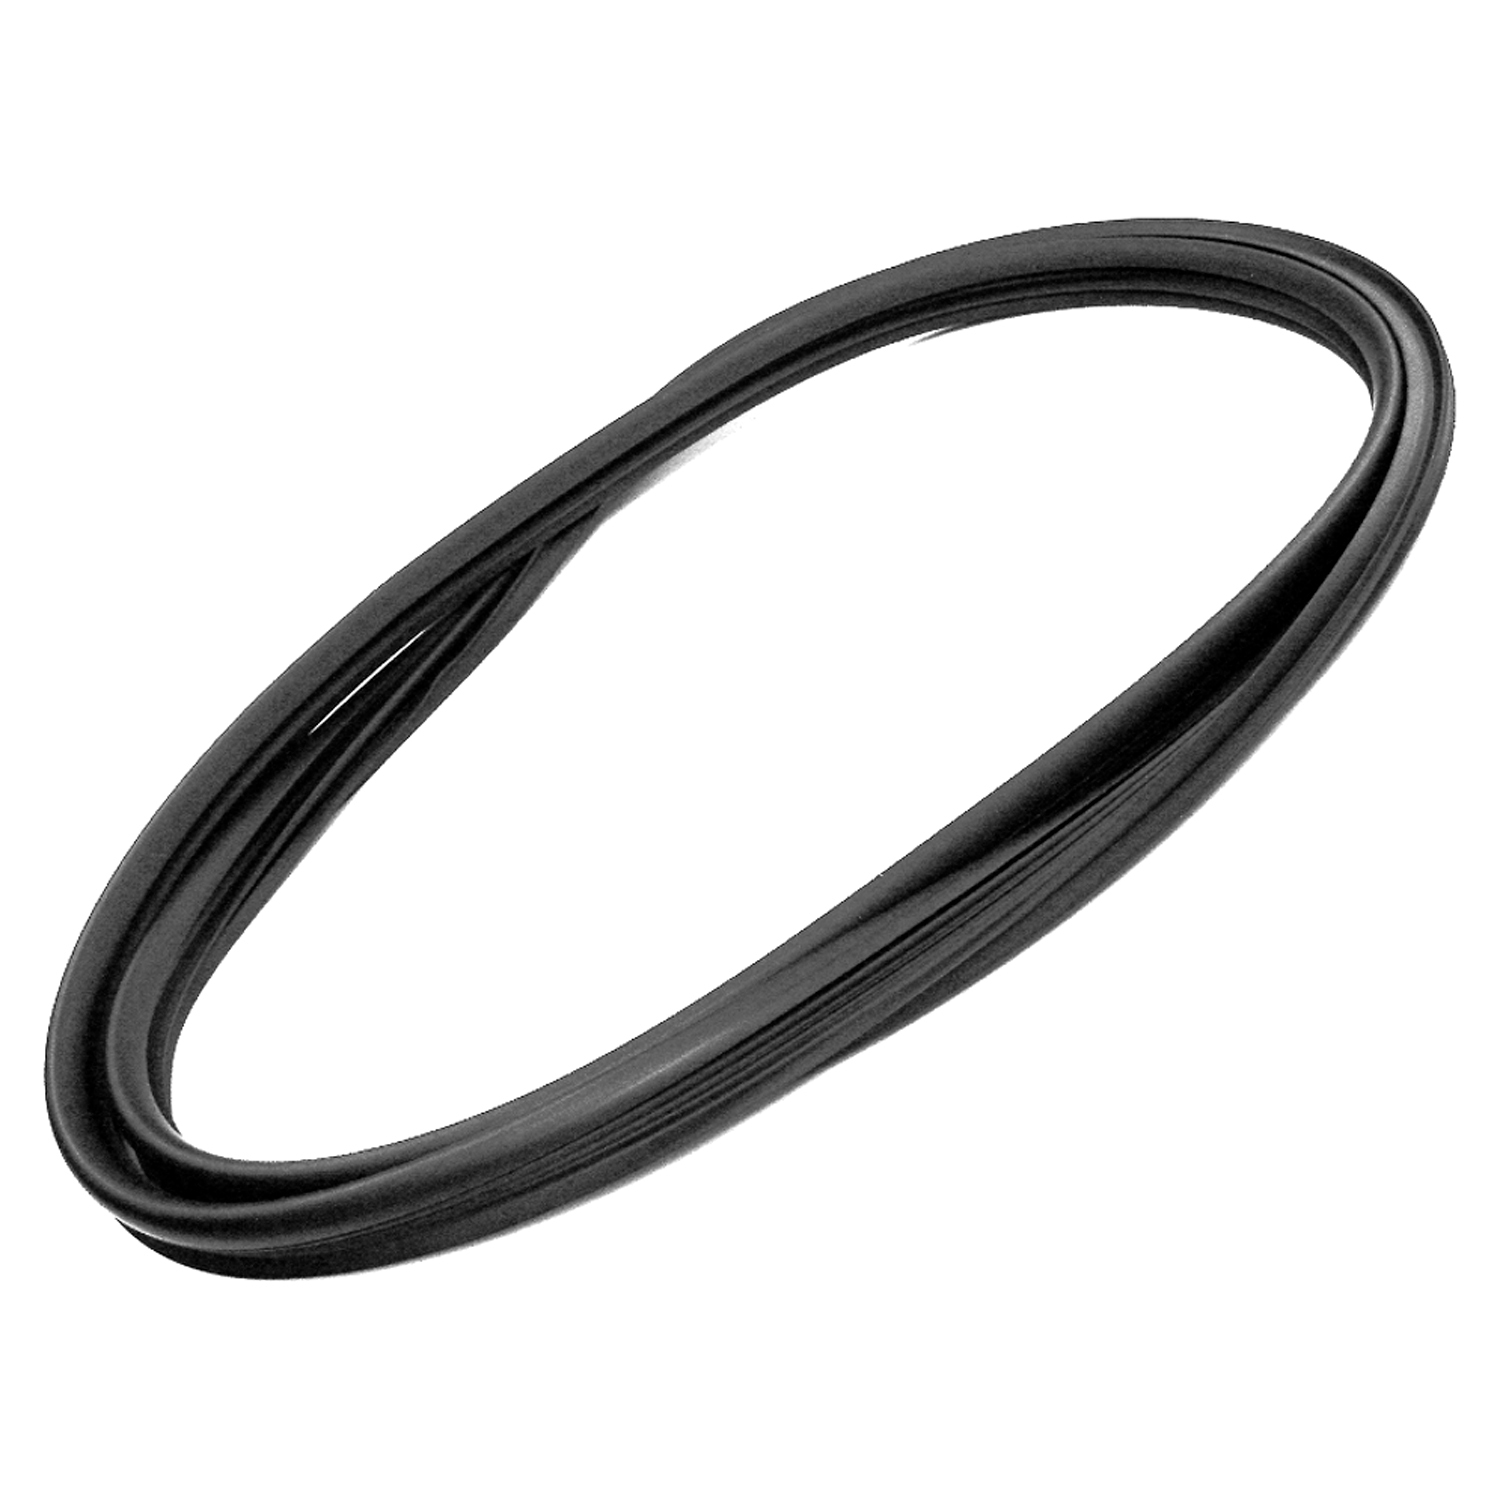 1974 Chevrolet K10 Pickup Windshield Seal, 73-87 GM Full Size Truck, 73-91 GM SUV, Without Trim Groove-VWS 7313-D